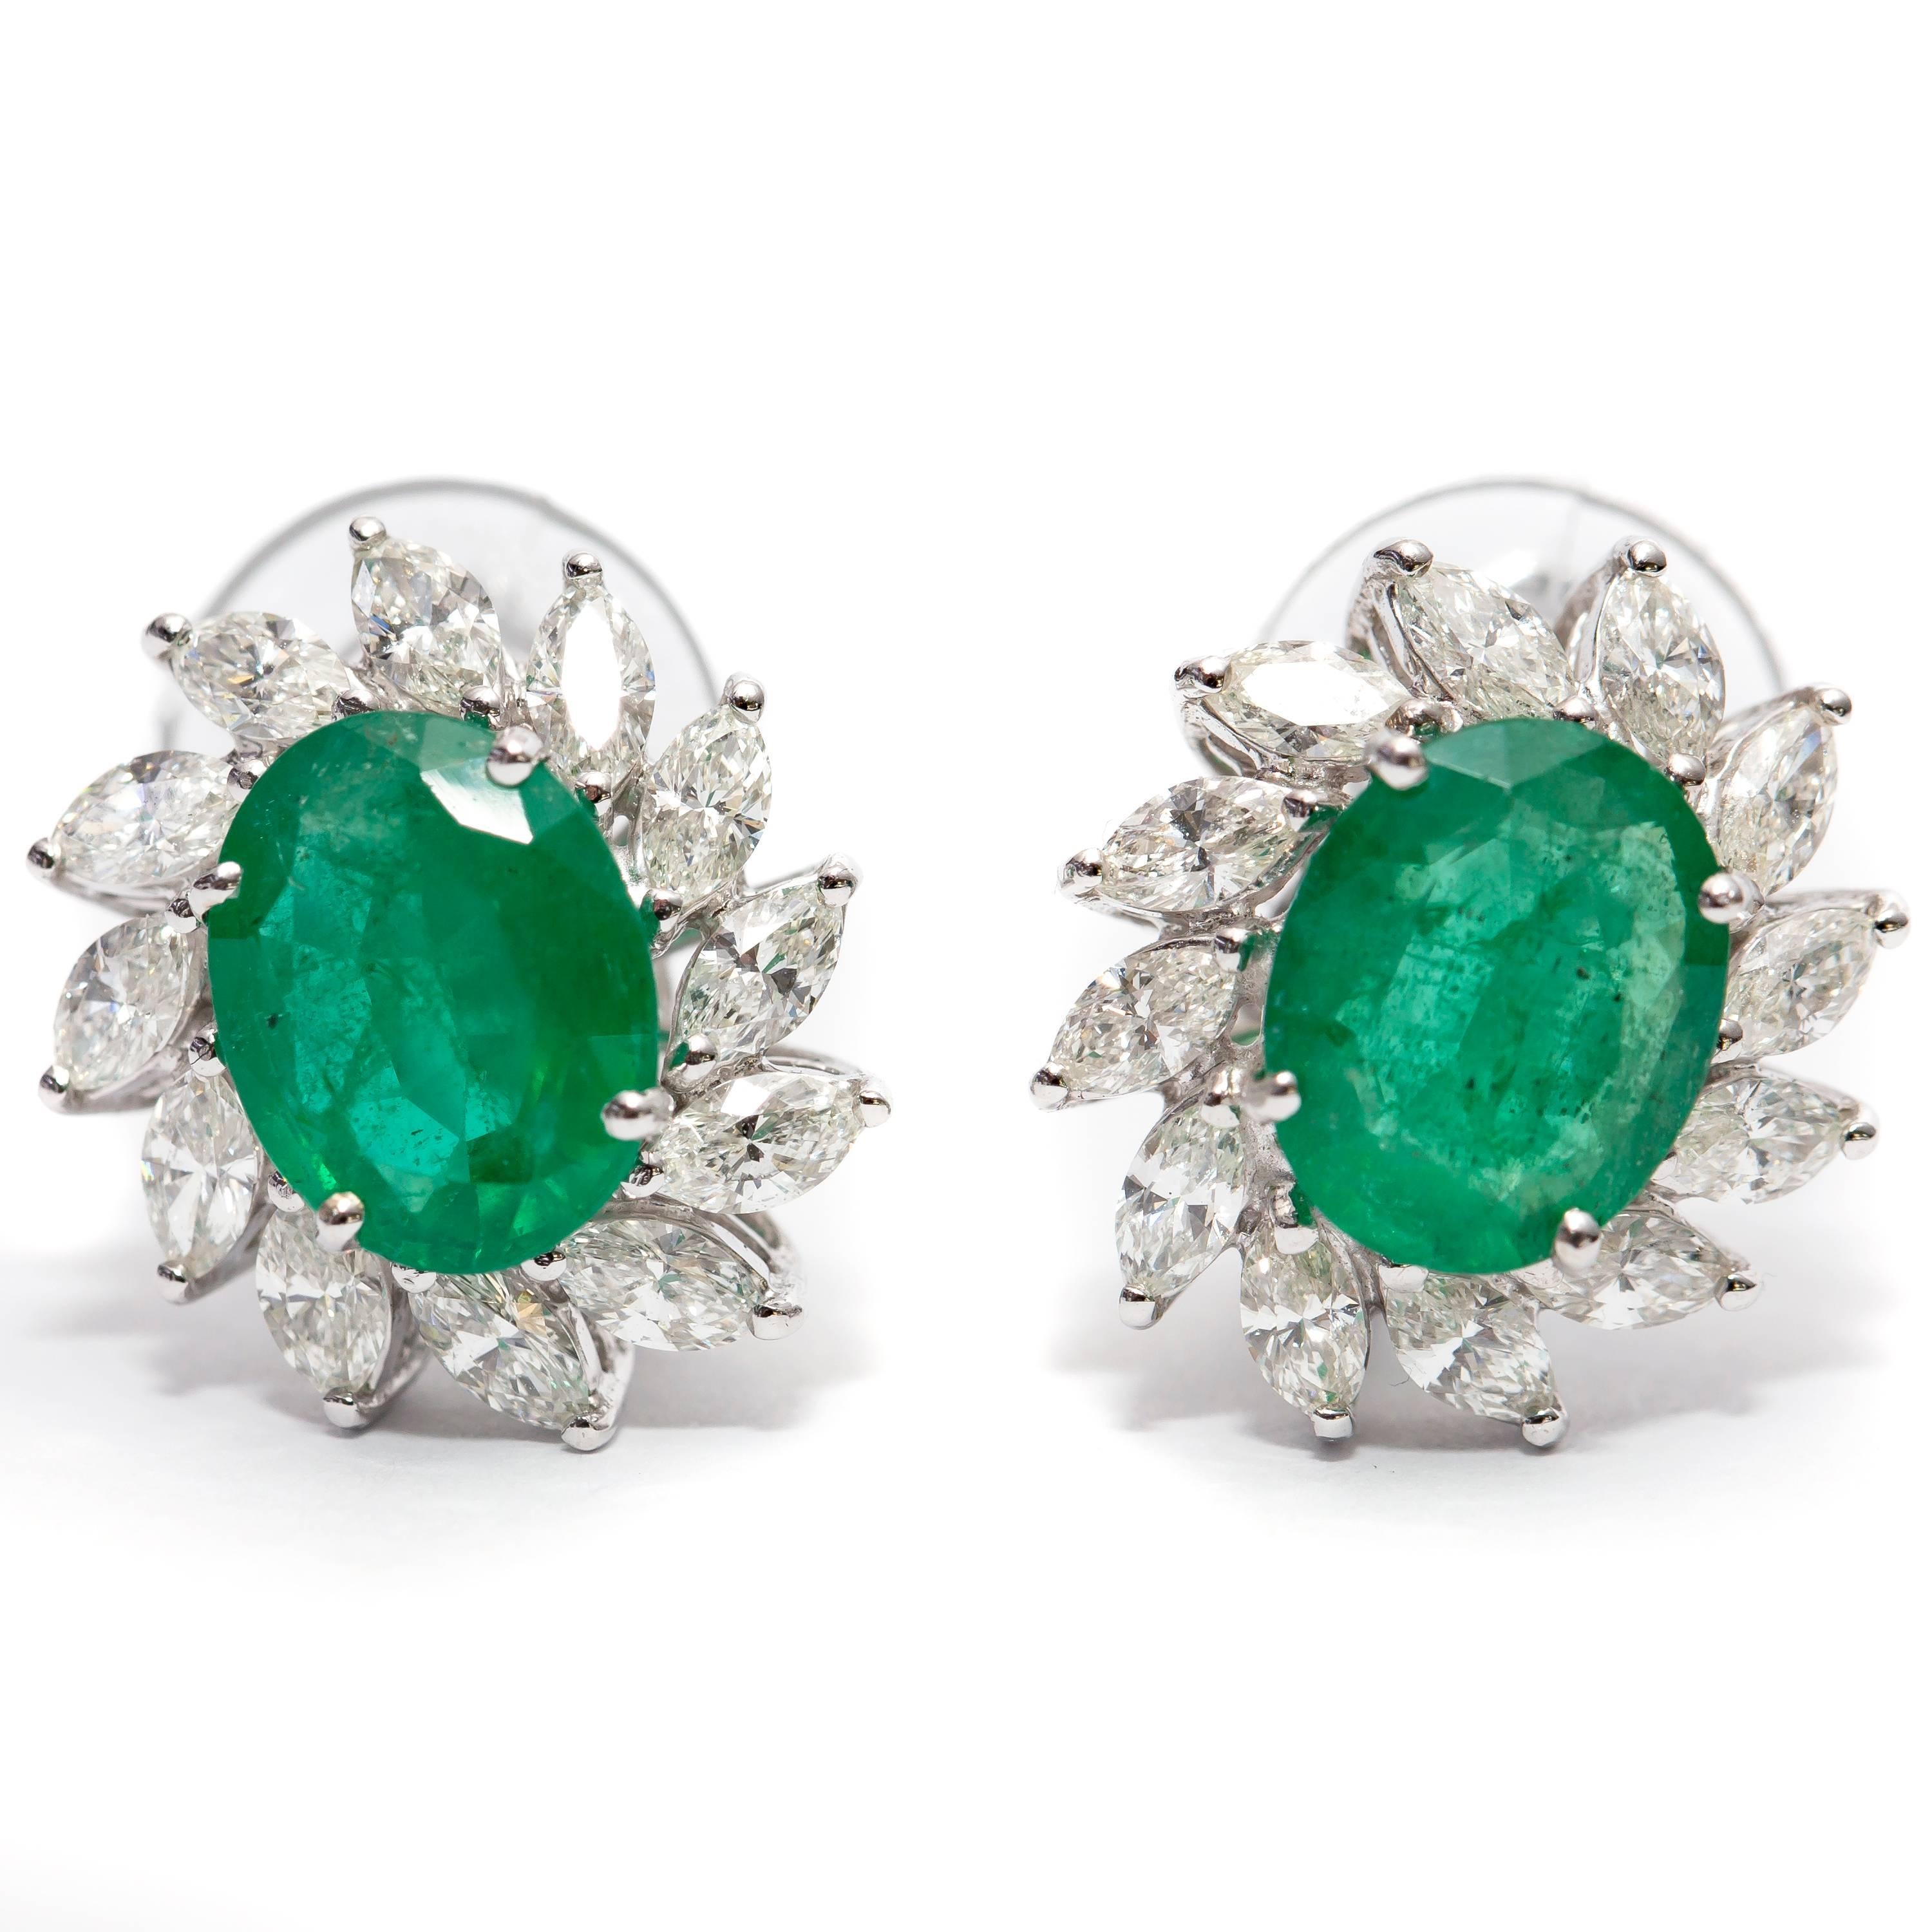 Marquise Cut 3.50 Carat Green Emerald 1.50 Carat Marquise Shaped 18 KT Gold Diamond Earrings